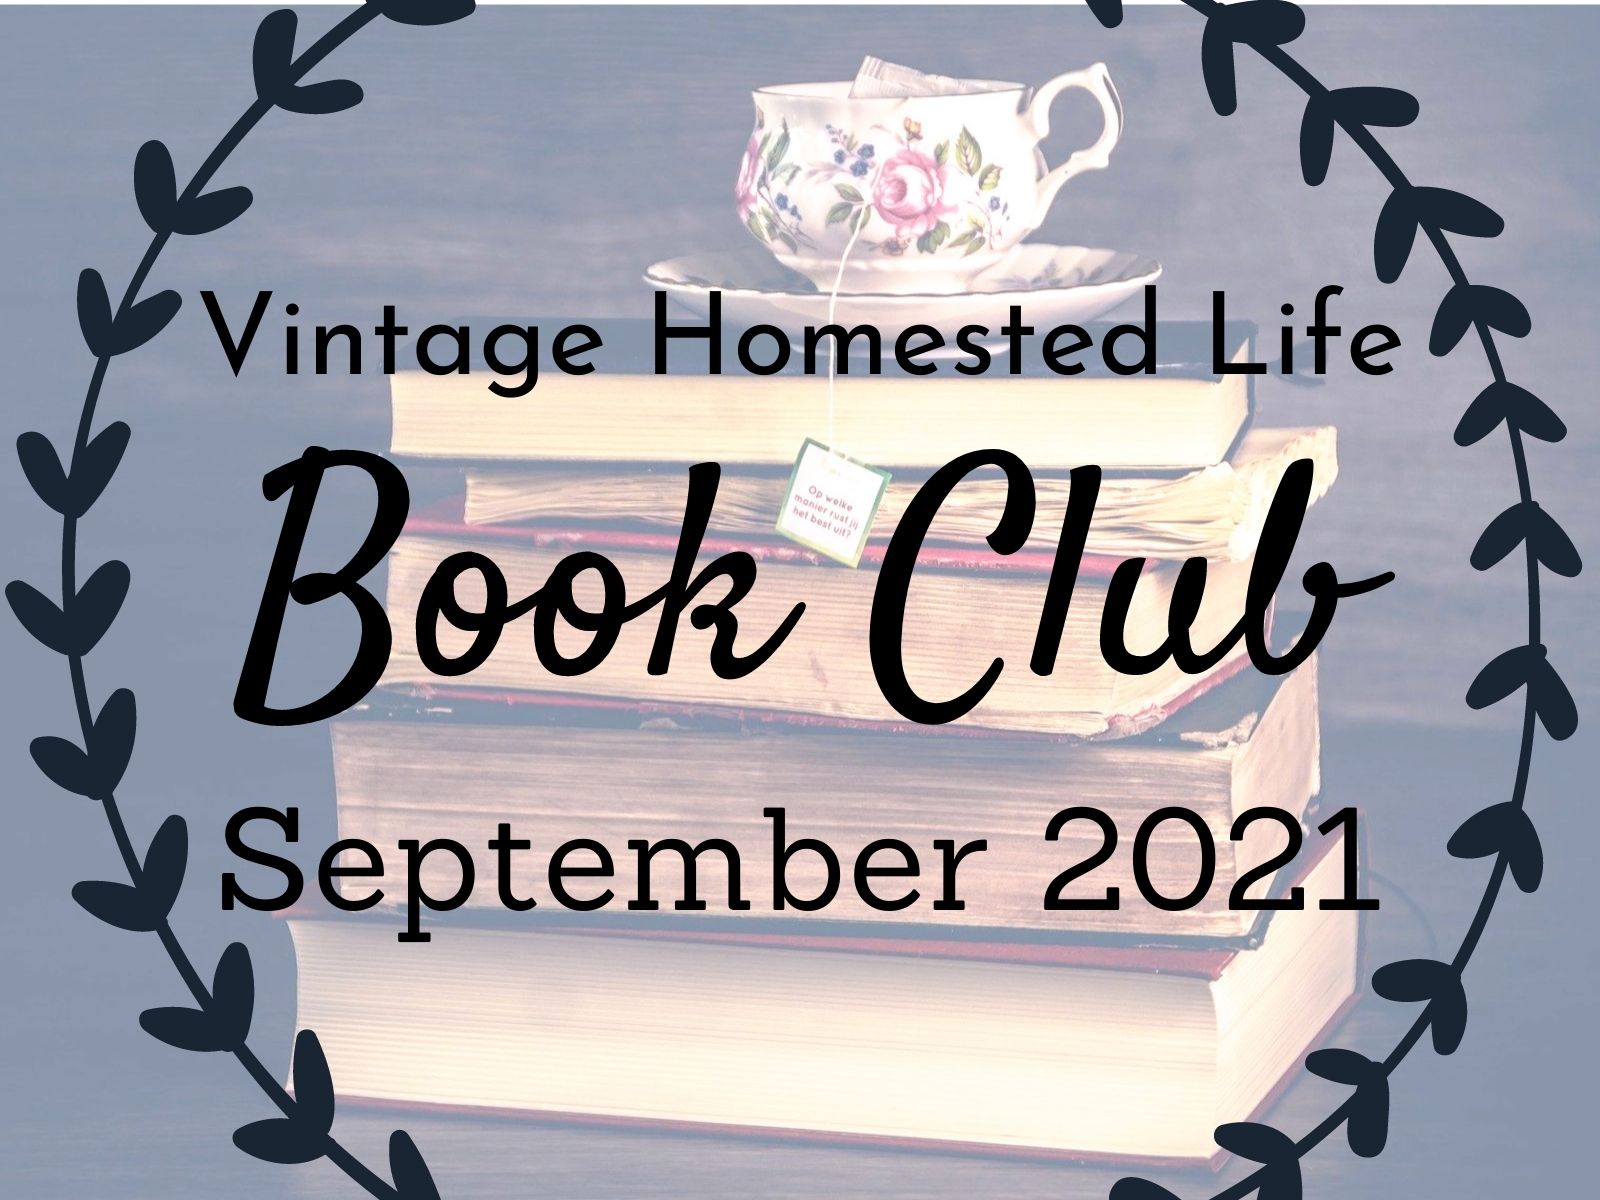 septermber 2021 book club graphic